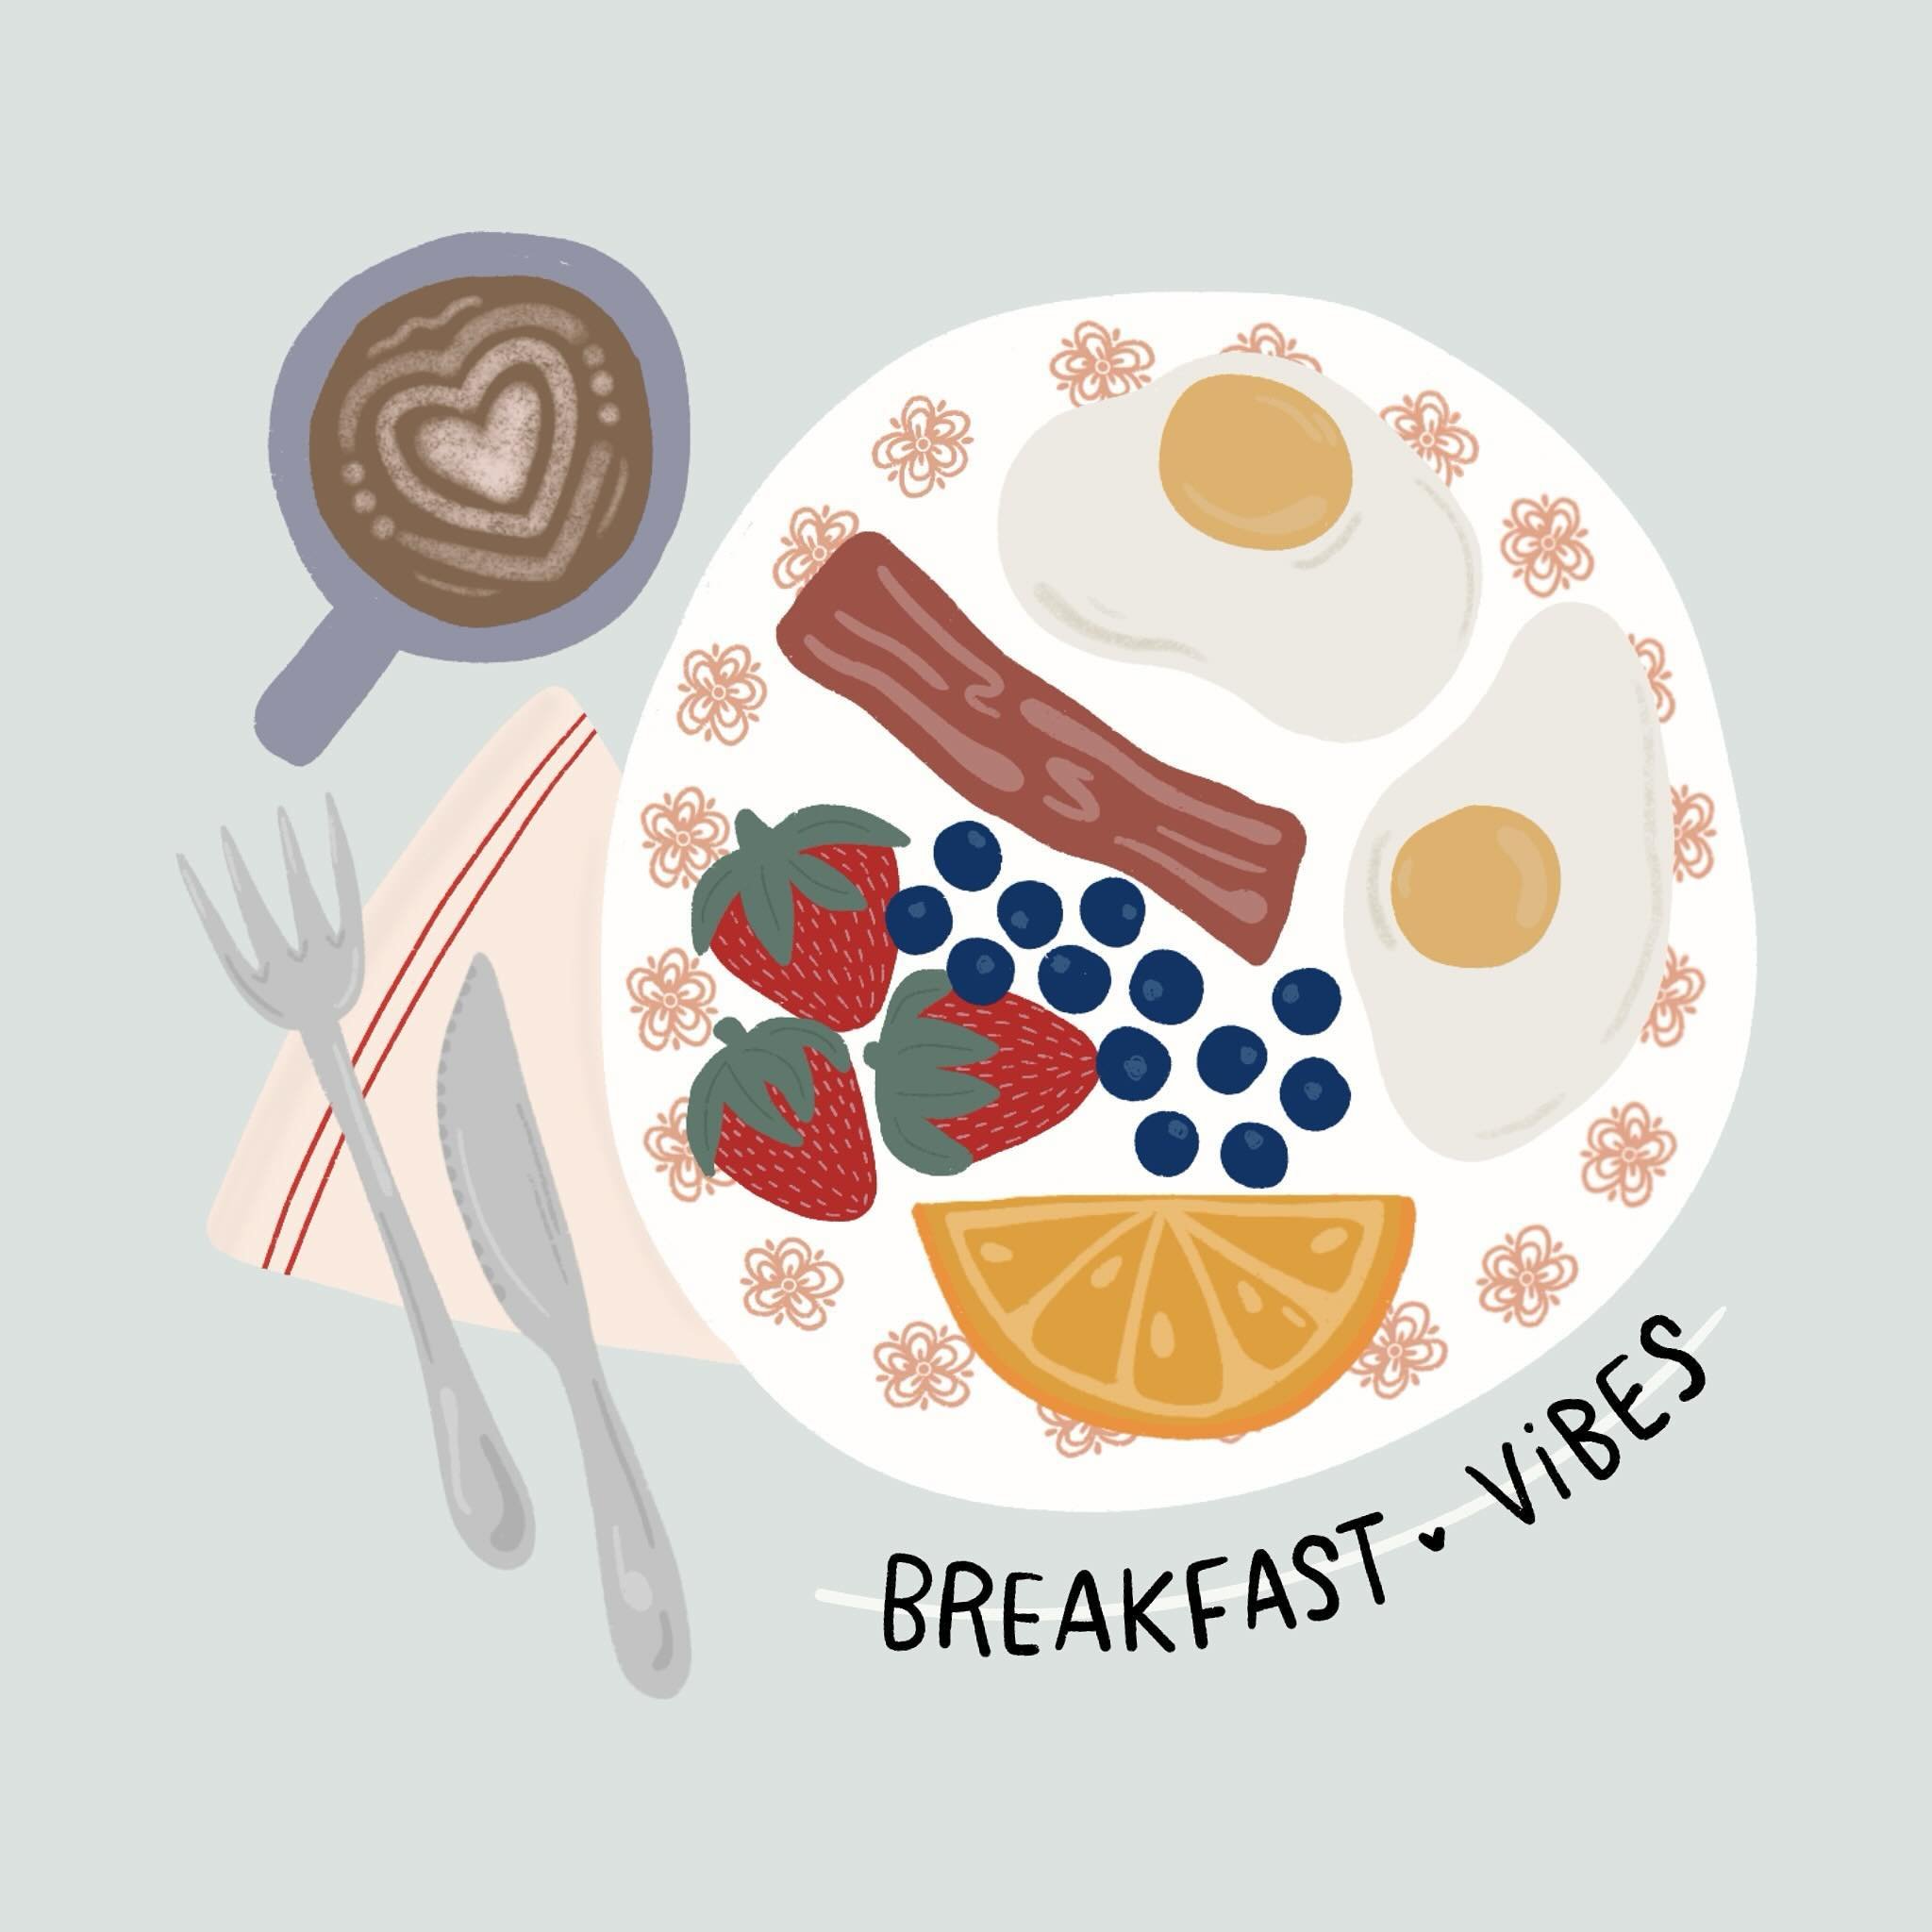 Good morning! Drew myself some breakfast since I&rsquo;m still sick and have zero interest in actual food. Loves it 🤪

Just for fun, tell me how you take your eggs!